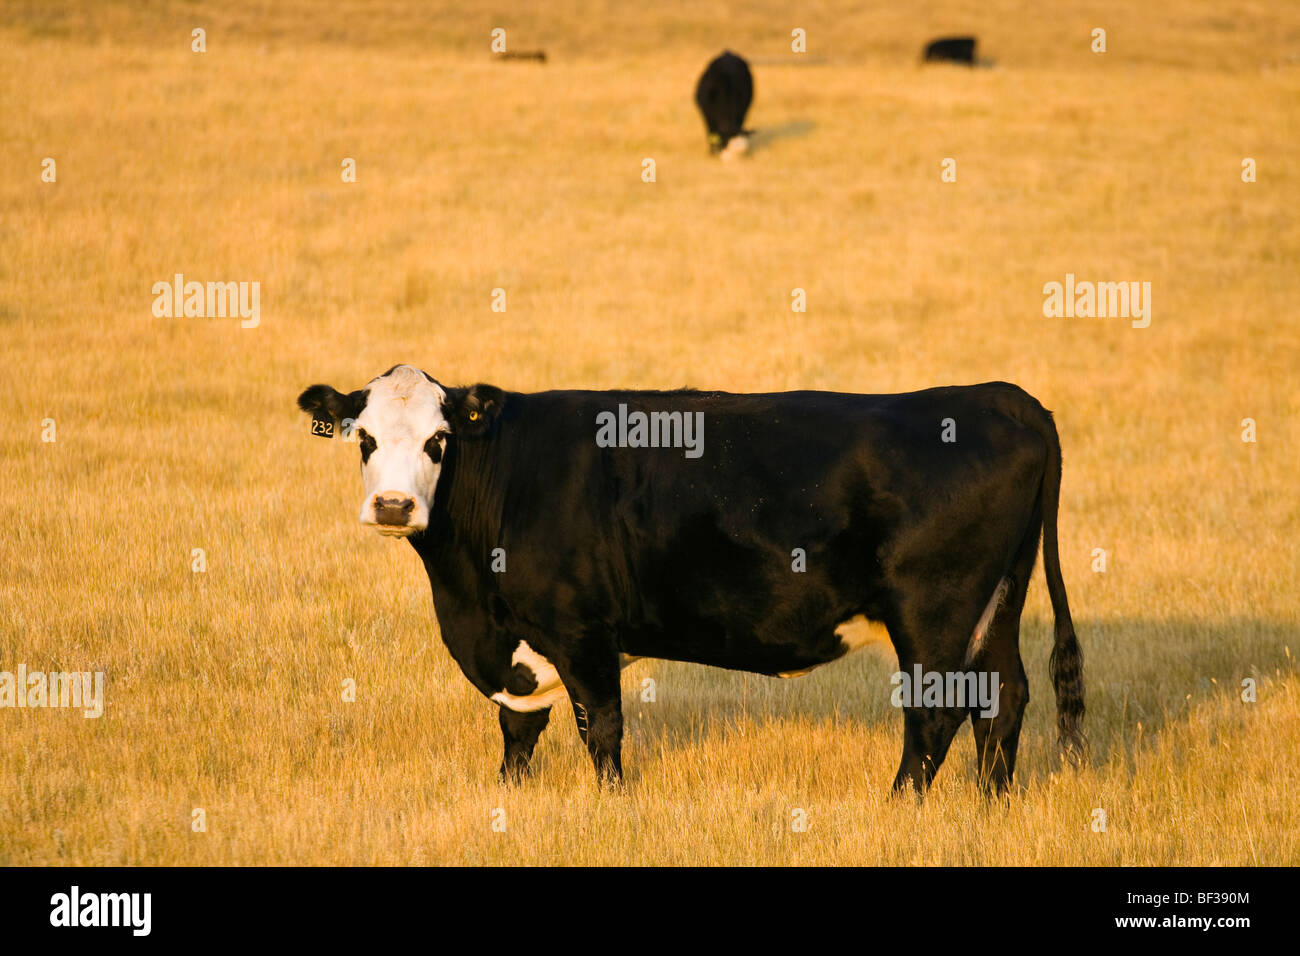 Livestock - Black Baldie cow on a pasture of cured grass in early Autumn / Alberta, Canada. Stock Photo